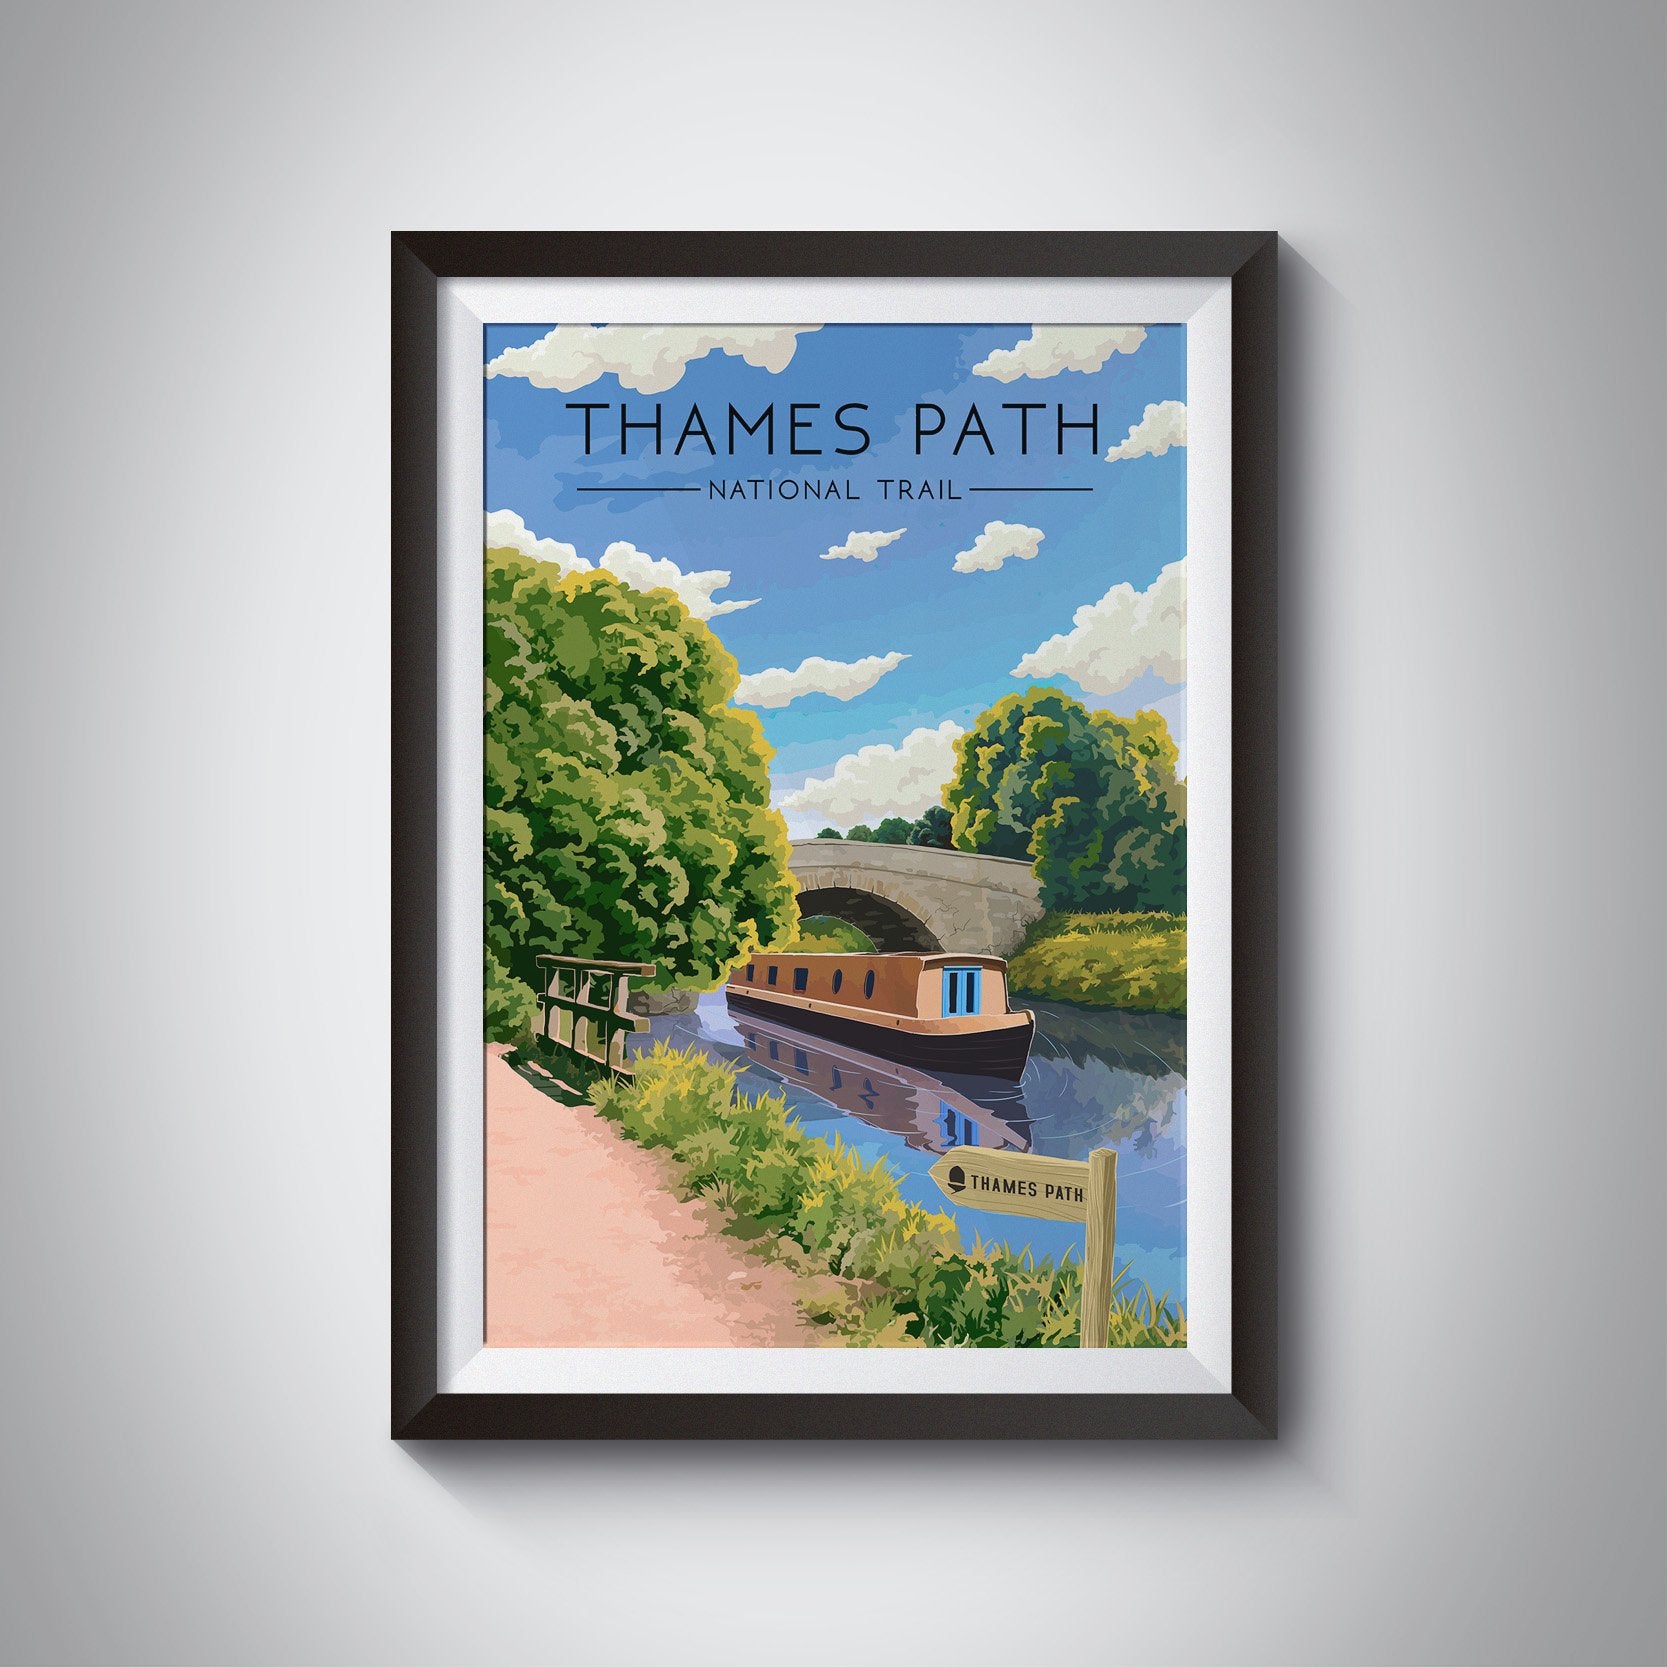 Thames Path National Trail Travel Poster